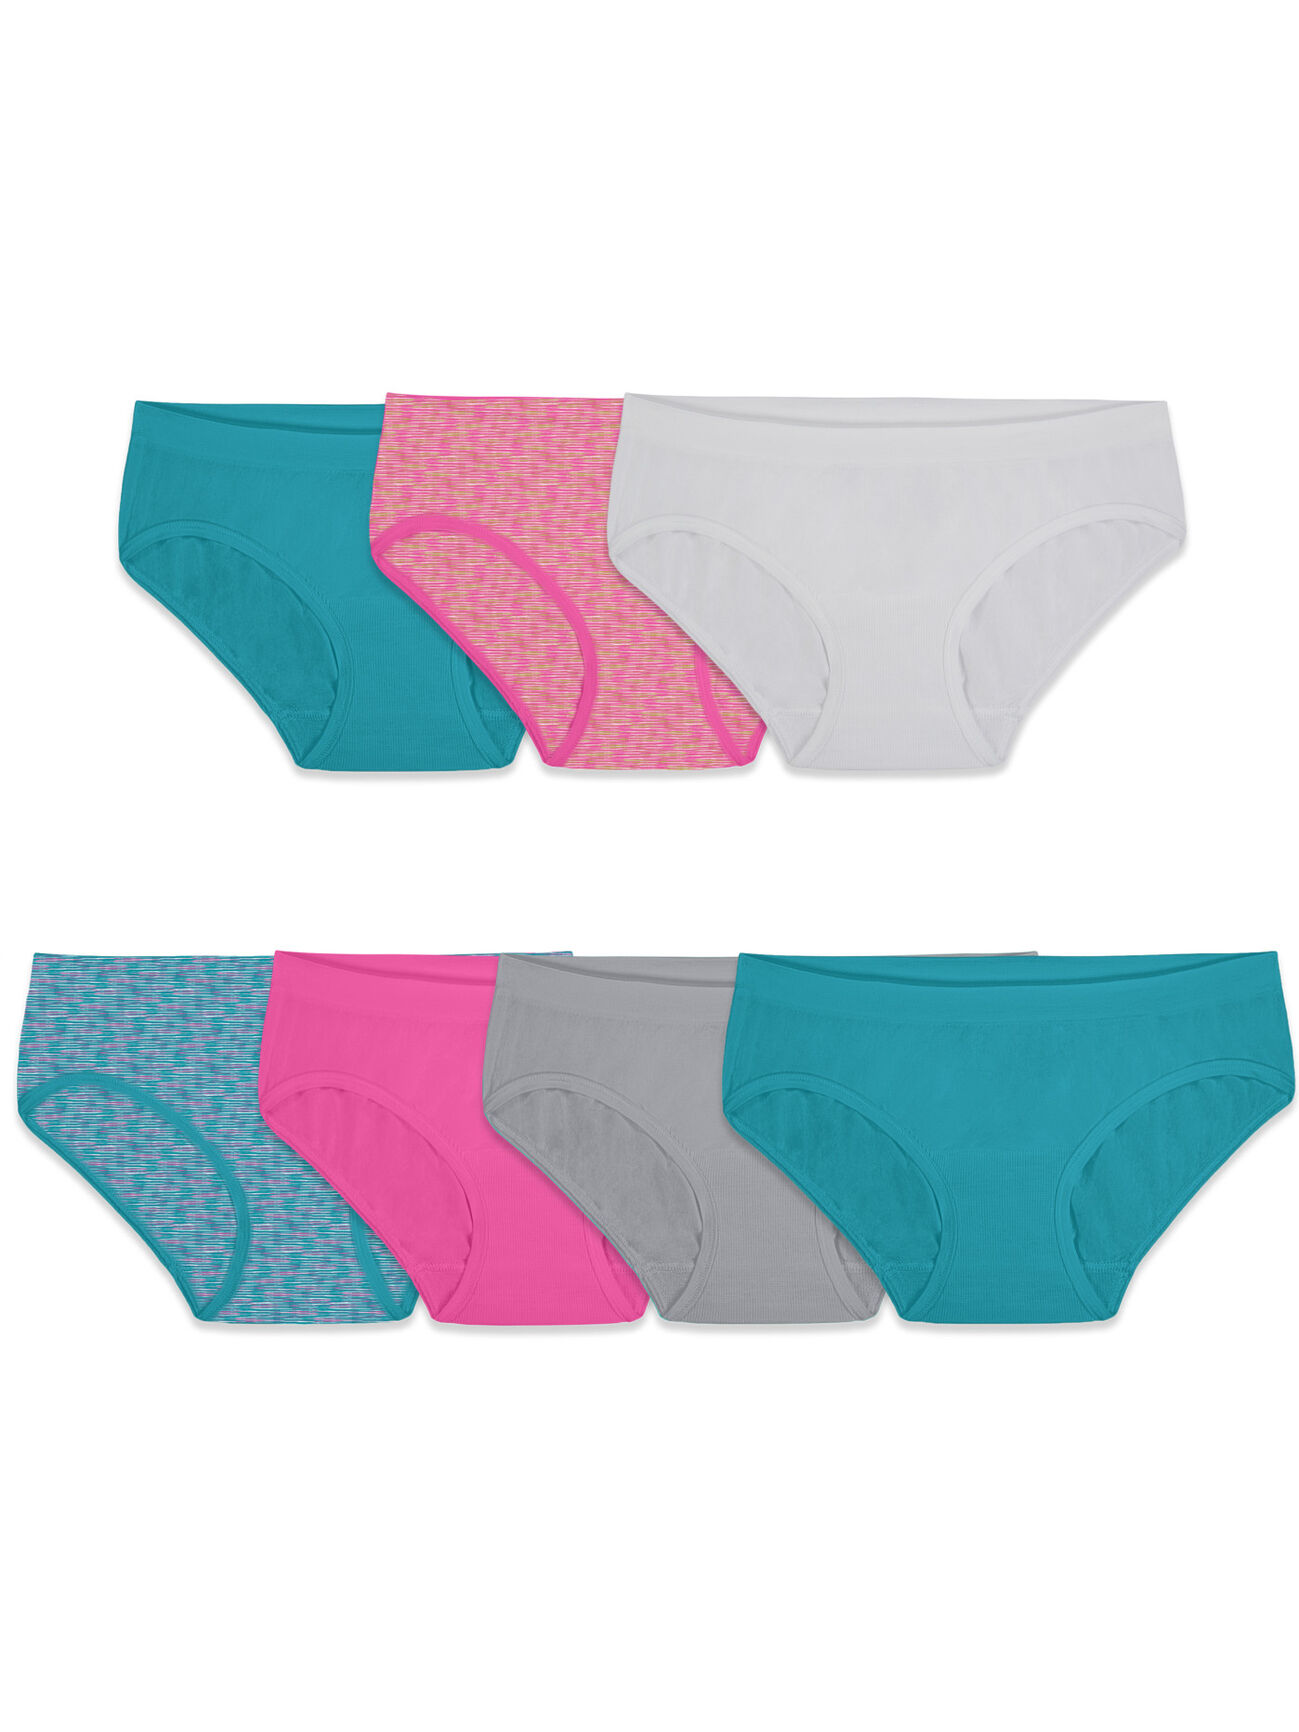 Fruit Of The Loom Girls Assorted Seamless Briefs, 6 Pack, 14-16 - (Color  May Vary)